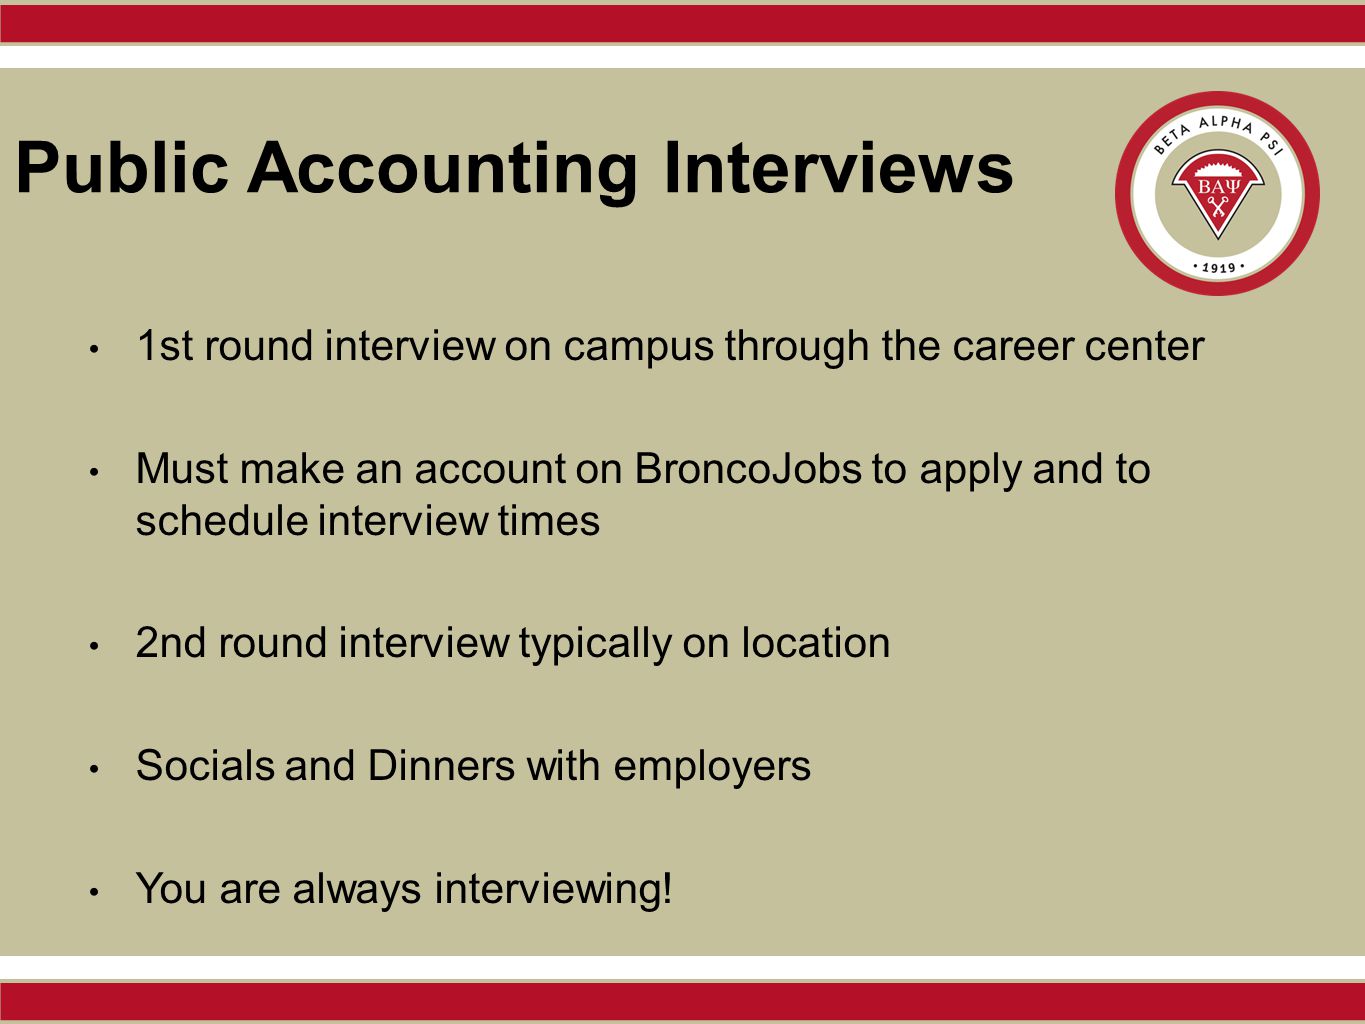 Public Accounting Interviews 1st round interview on campus through the career center Must make an account on BroncoJobs to apply and to schedule interview times 2nd round interview typically on location Socials and Dinners with employers You are always interviewing!